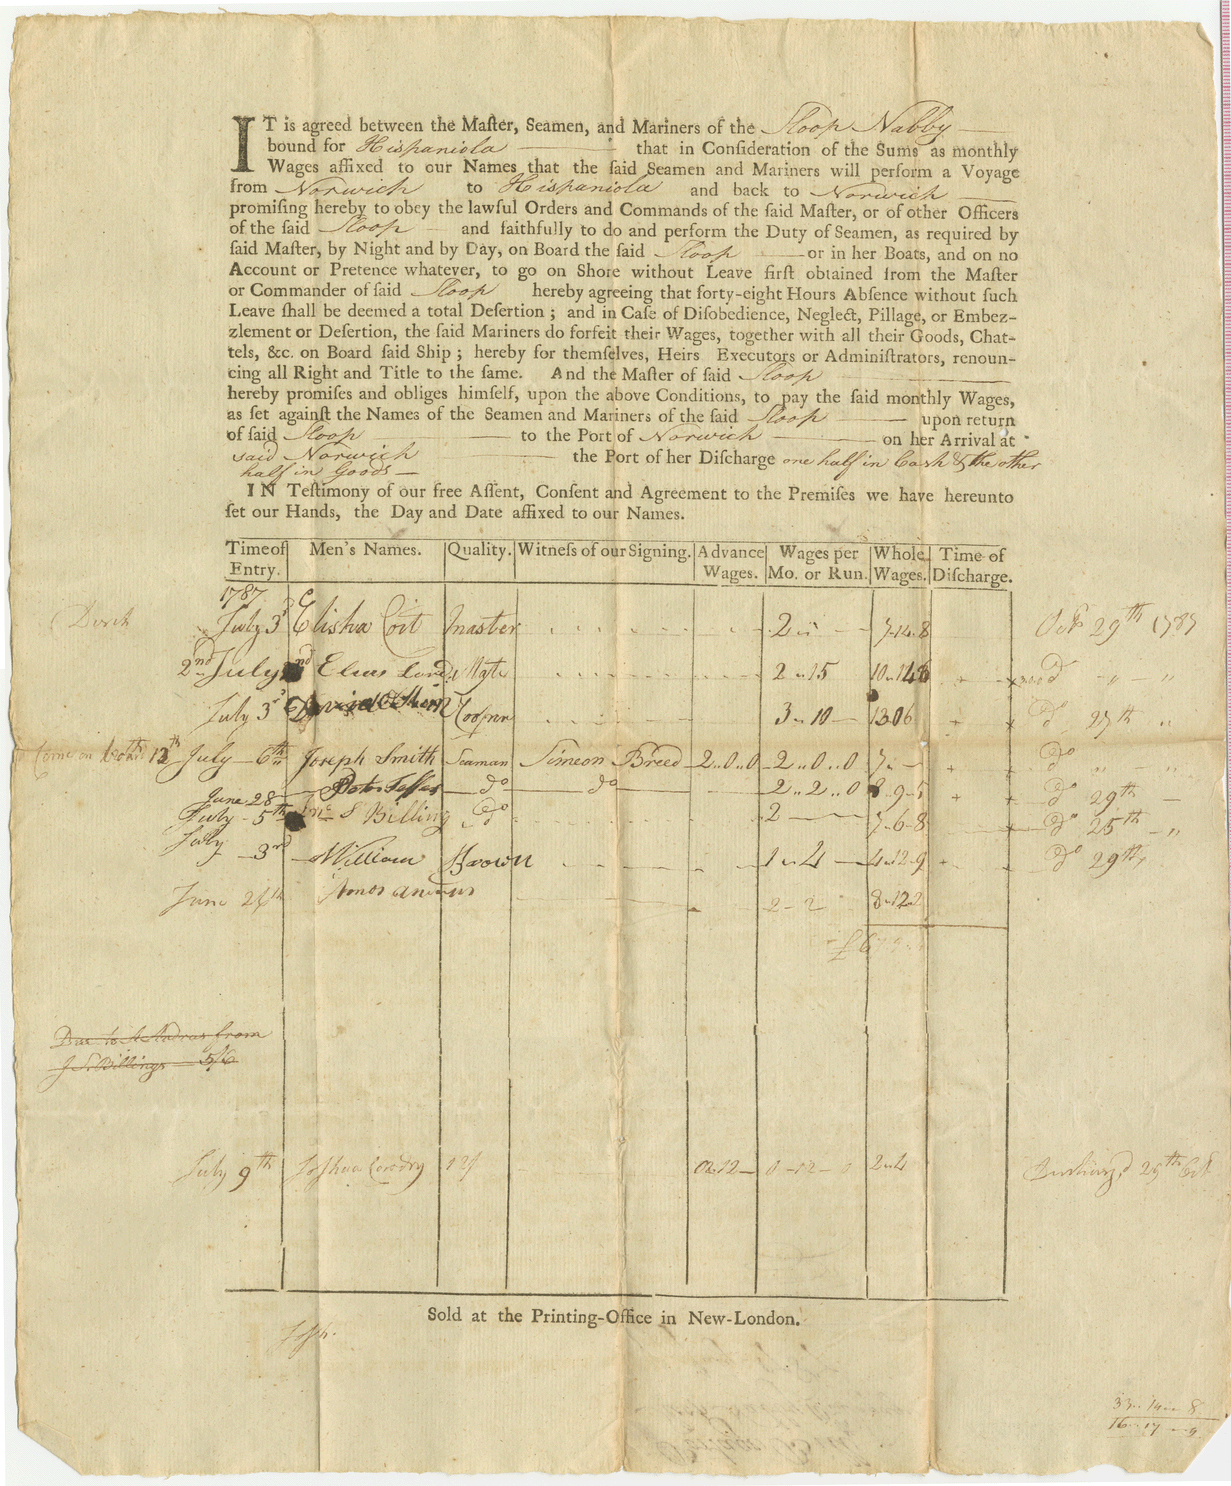 Articles of Agreement (front)